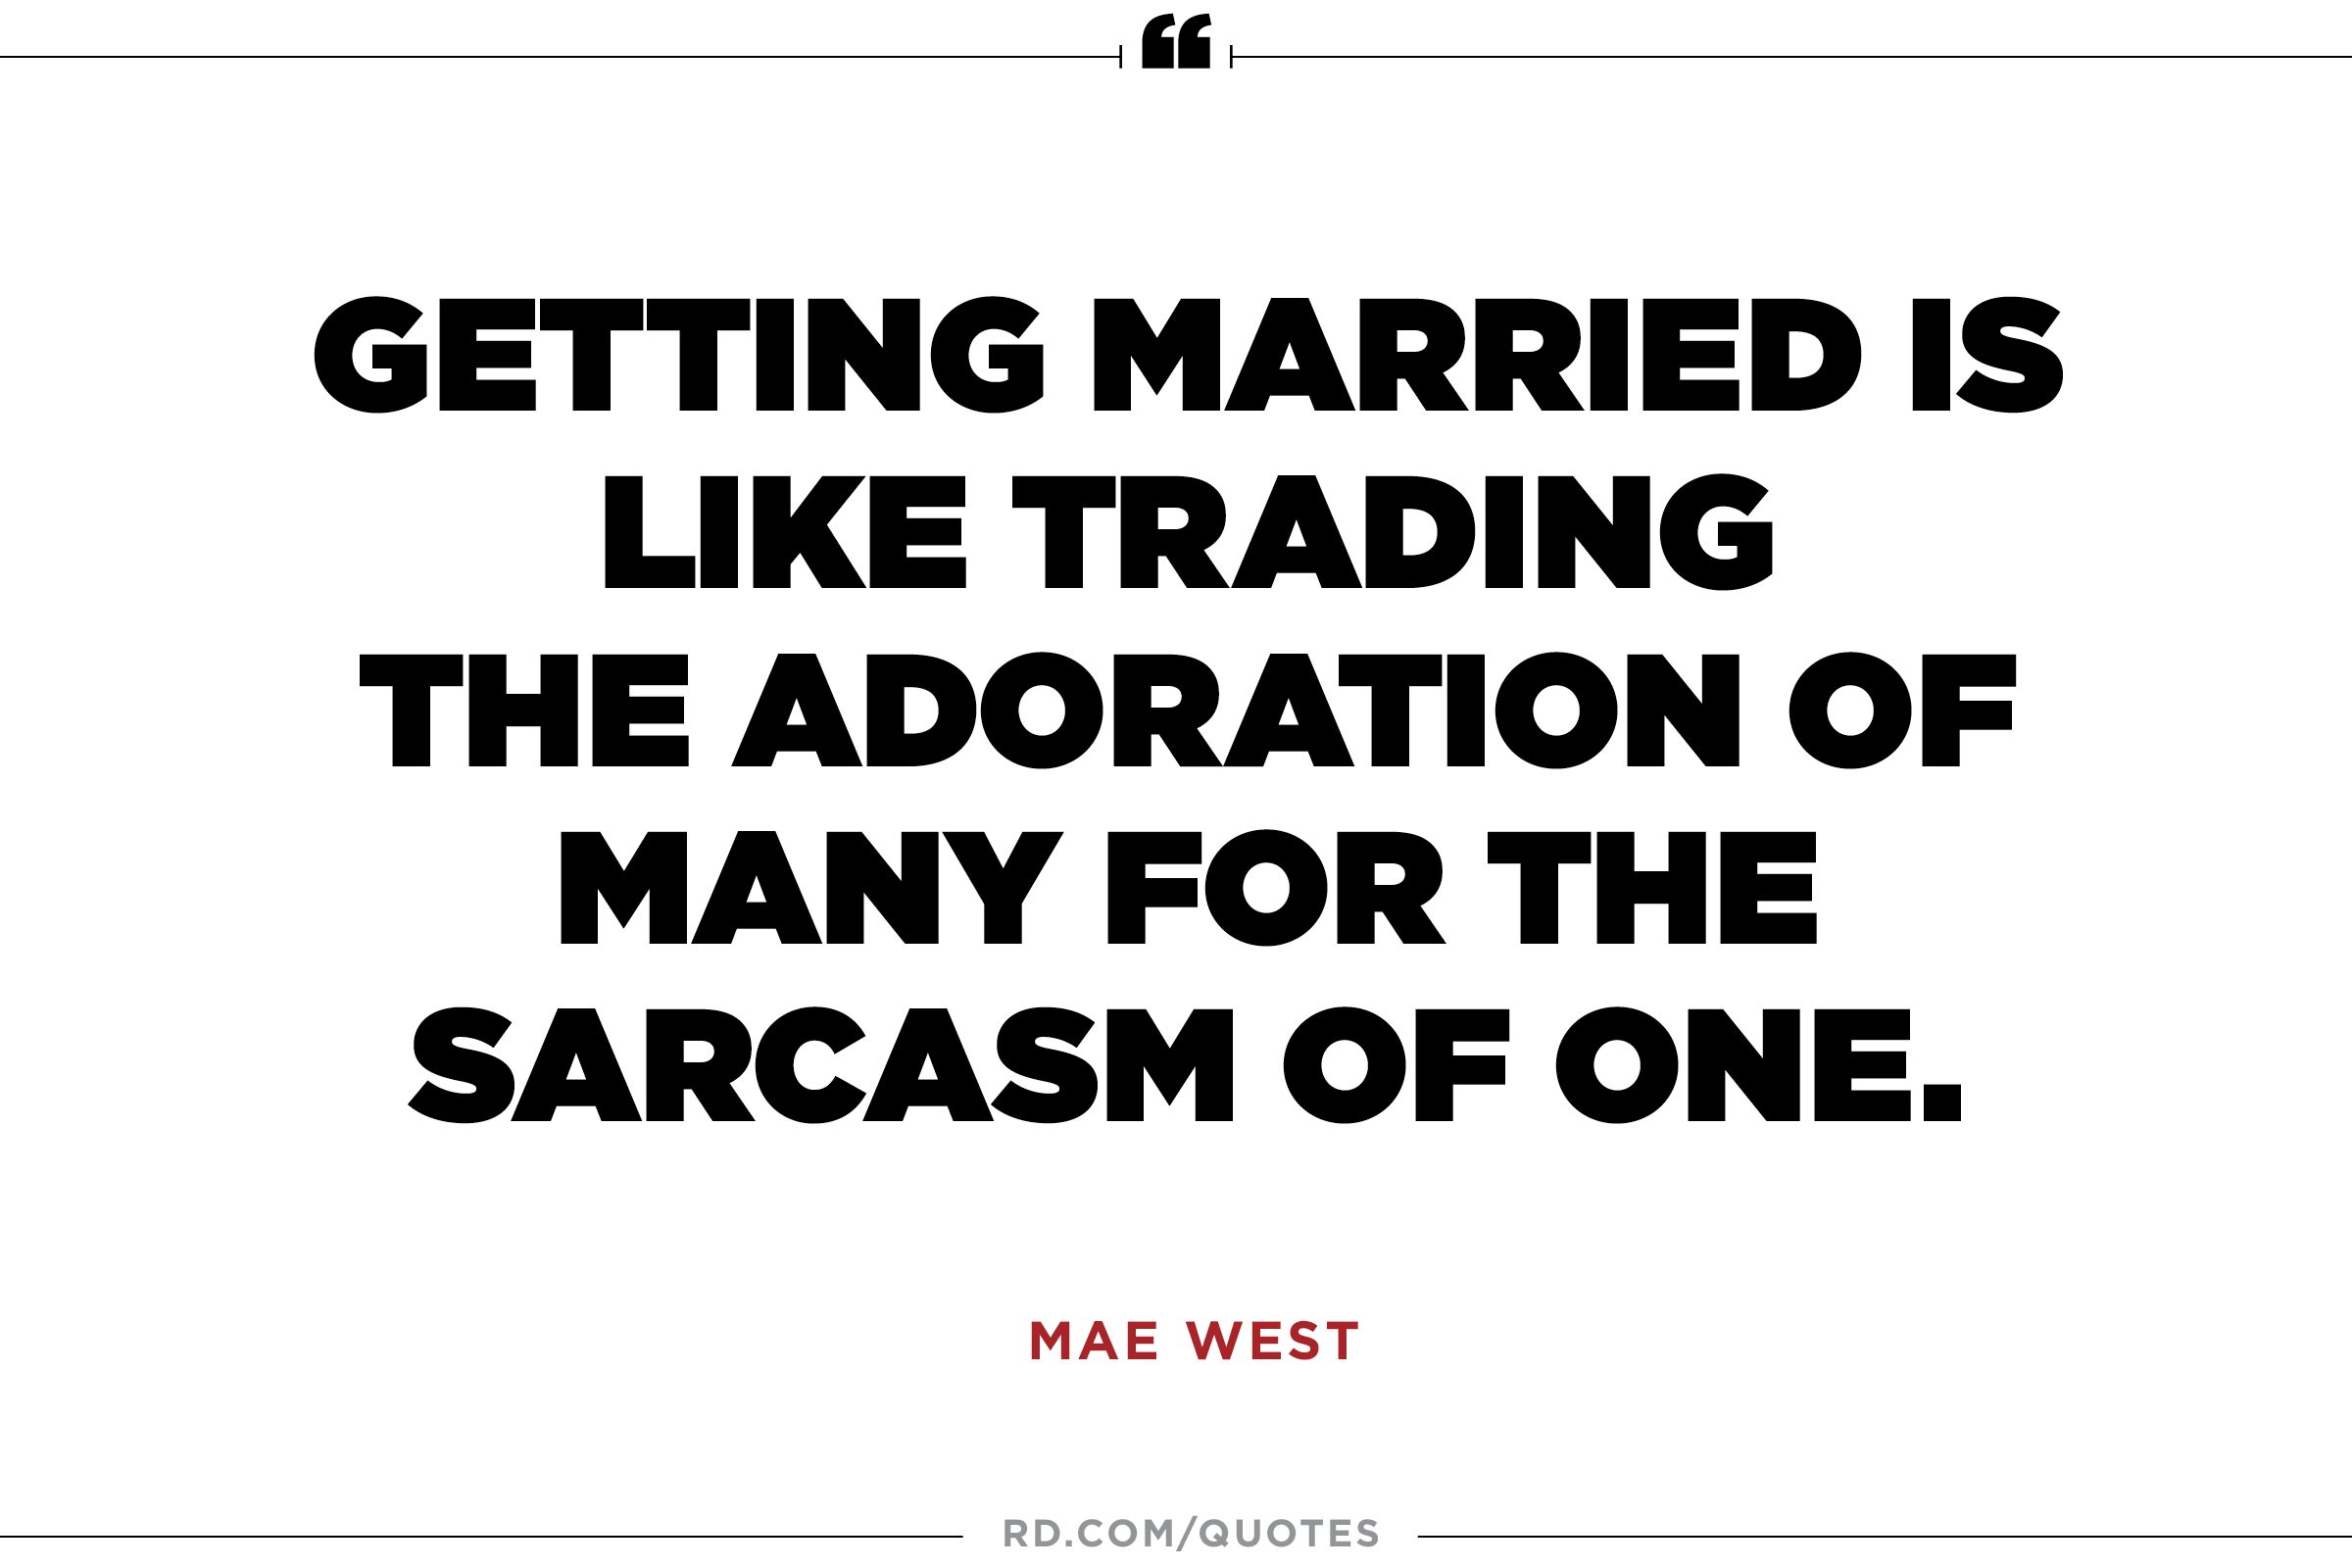 Getting married is like trading the adoration of many for the sarcasm of one